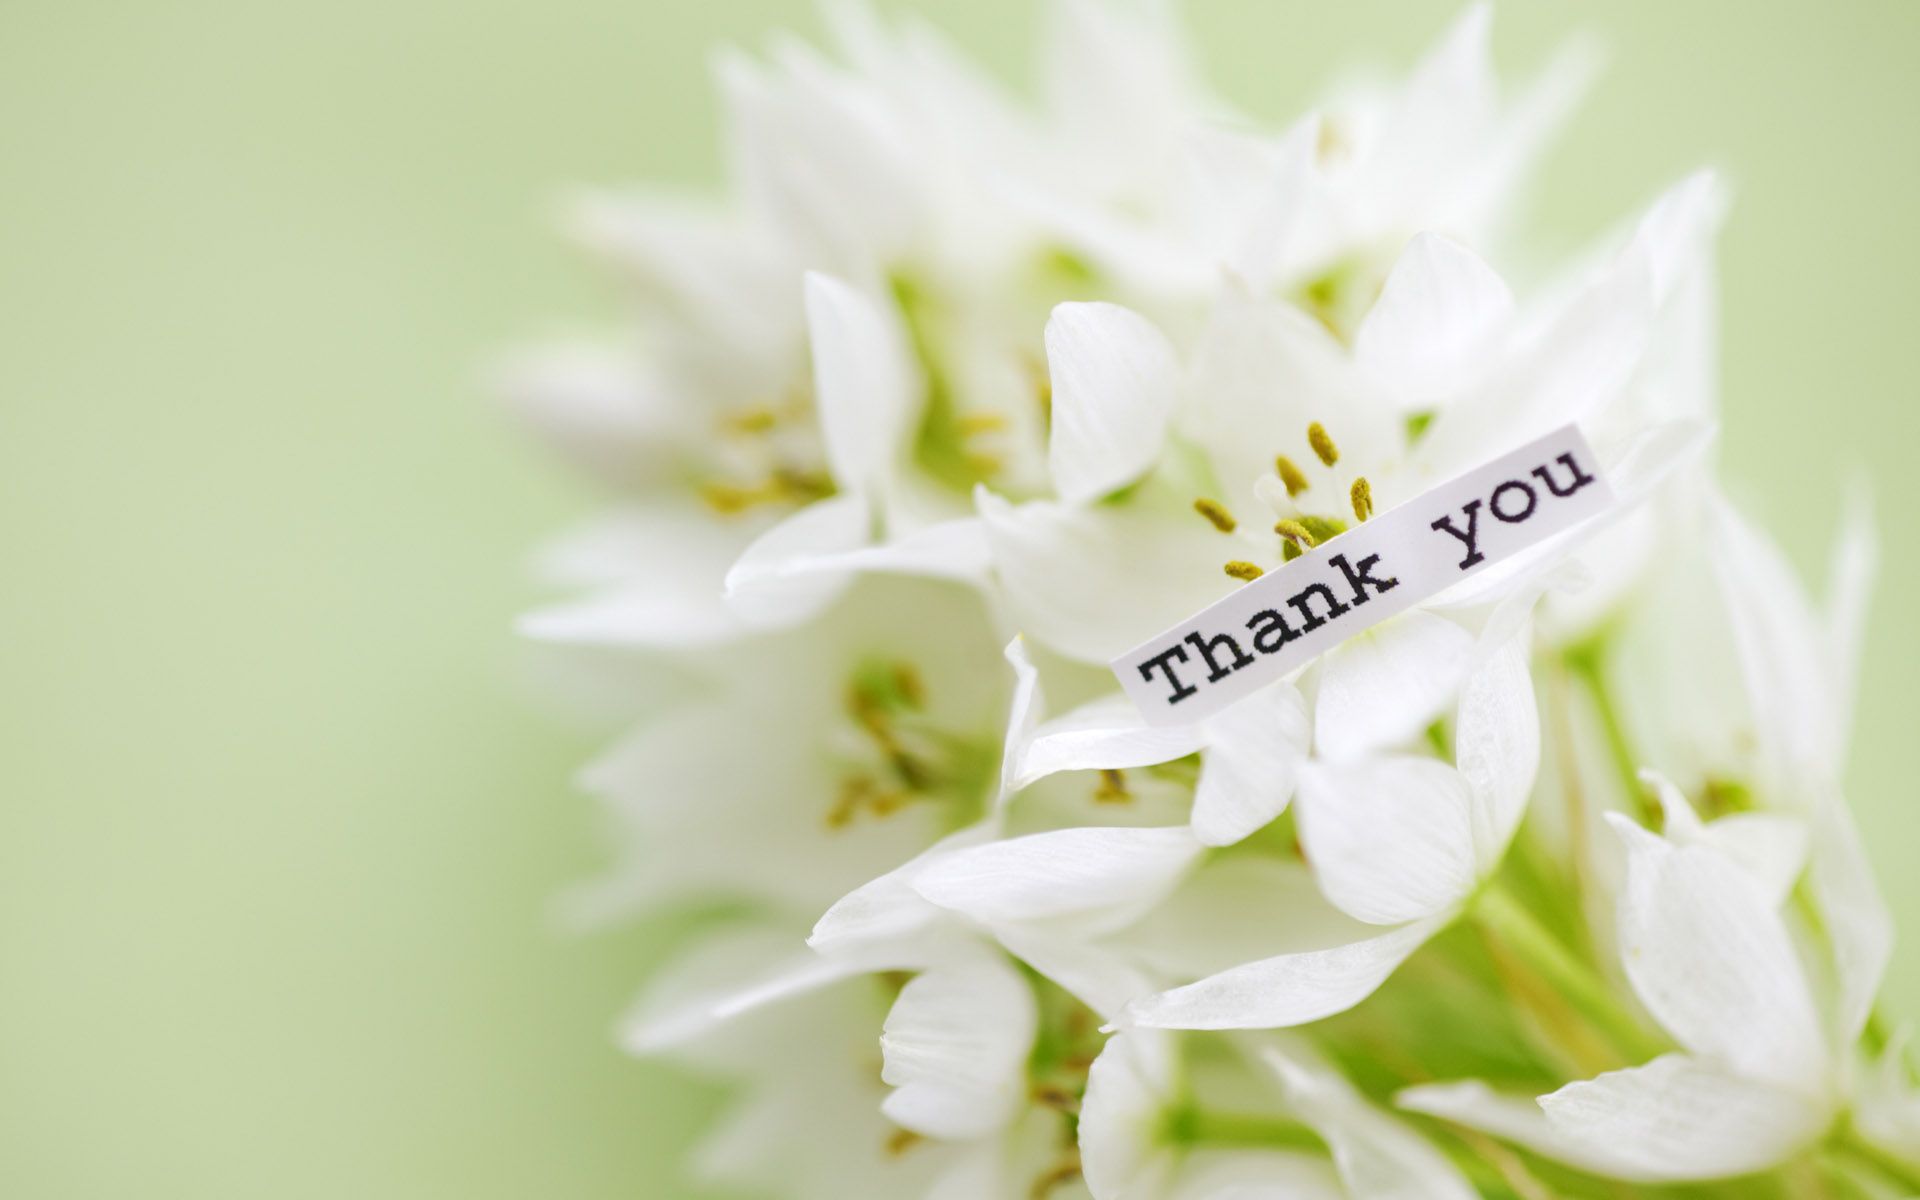 New Thank You for desktop hd wallpapers Wallpapers Wide Free